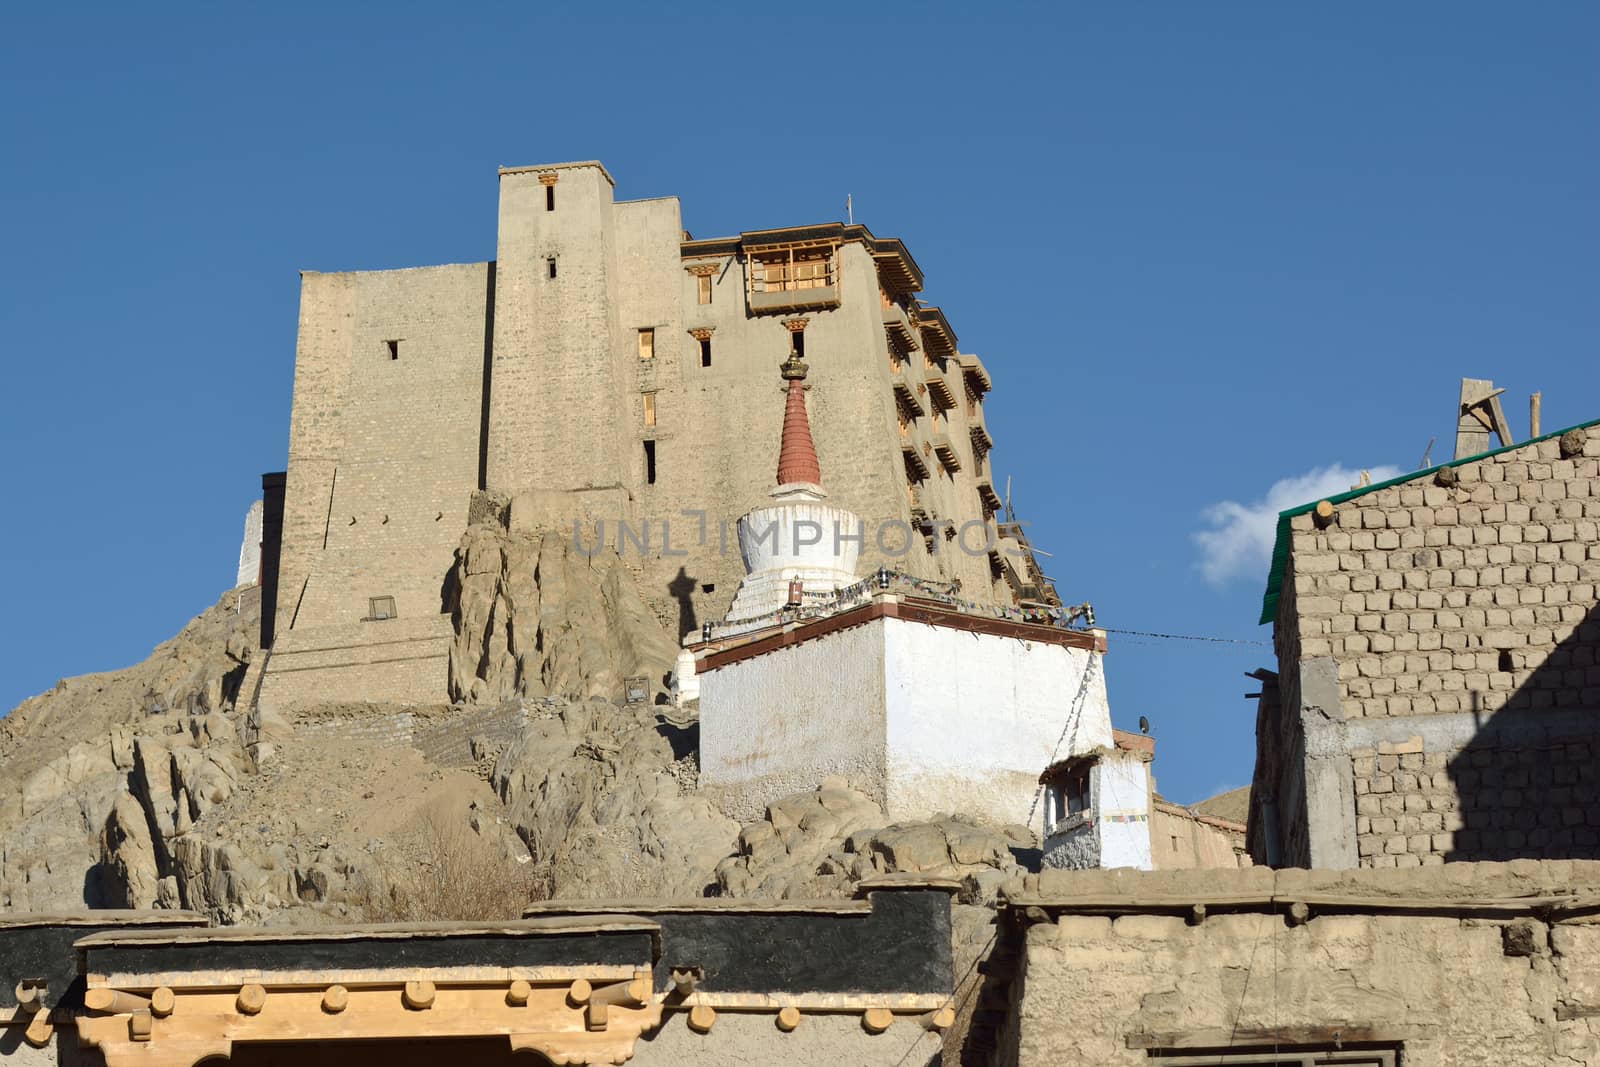 A stupa in the city of Leh by think4photop